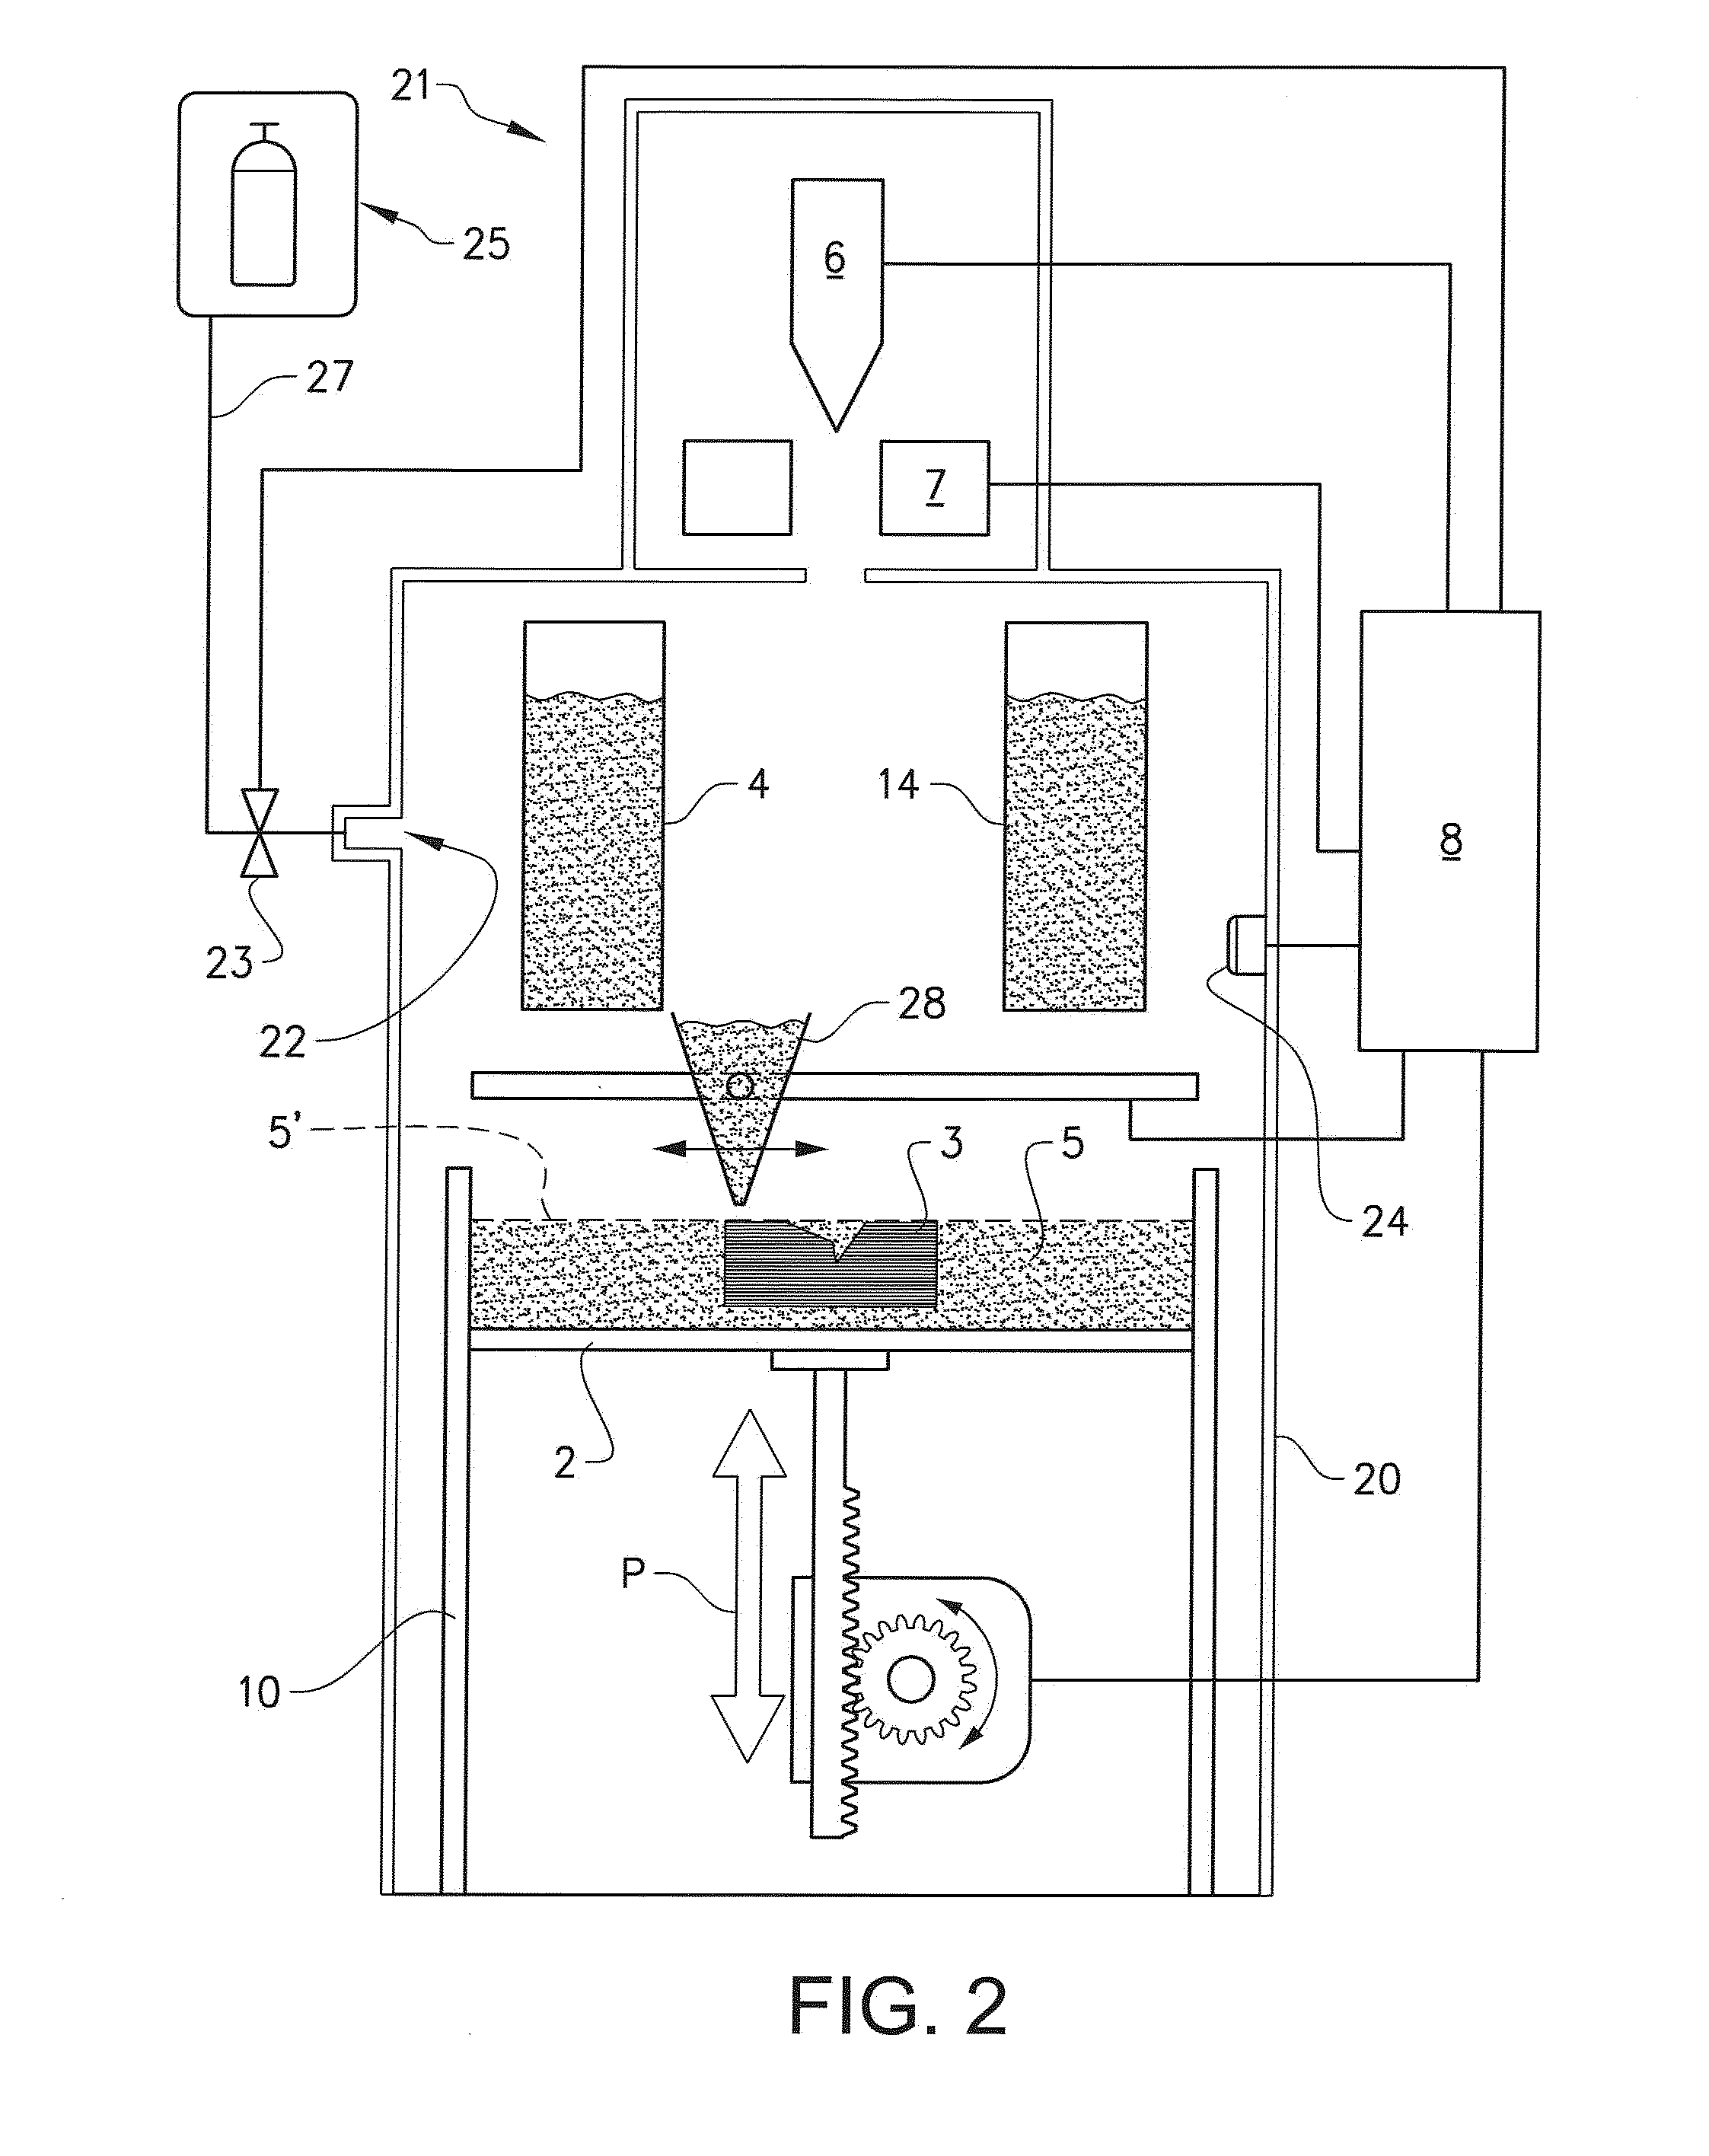 Method and apparatus for increasing the resolution in additively manufactured three-dimensional articles